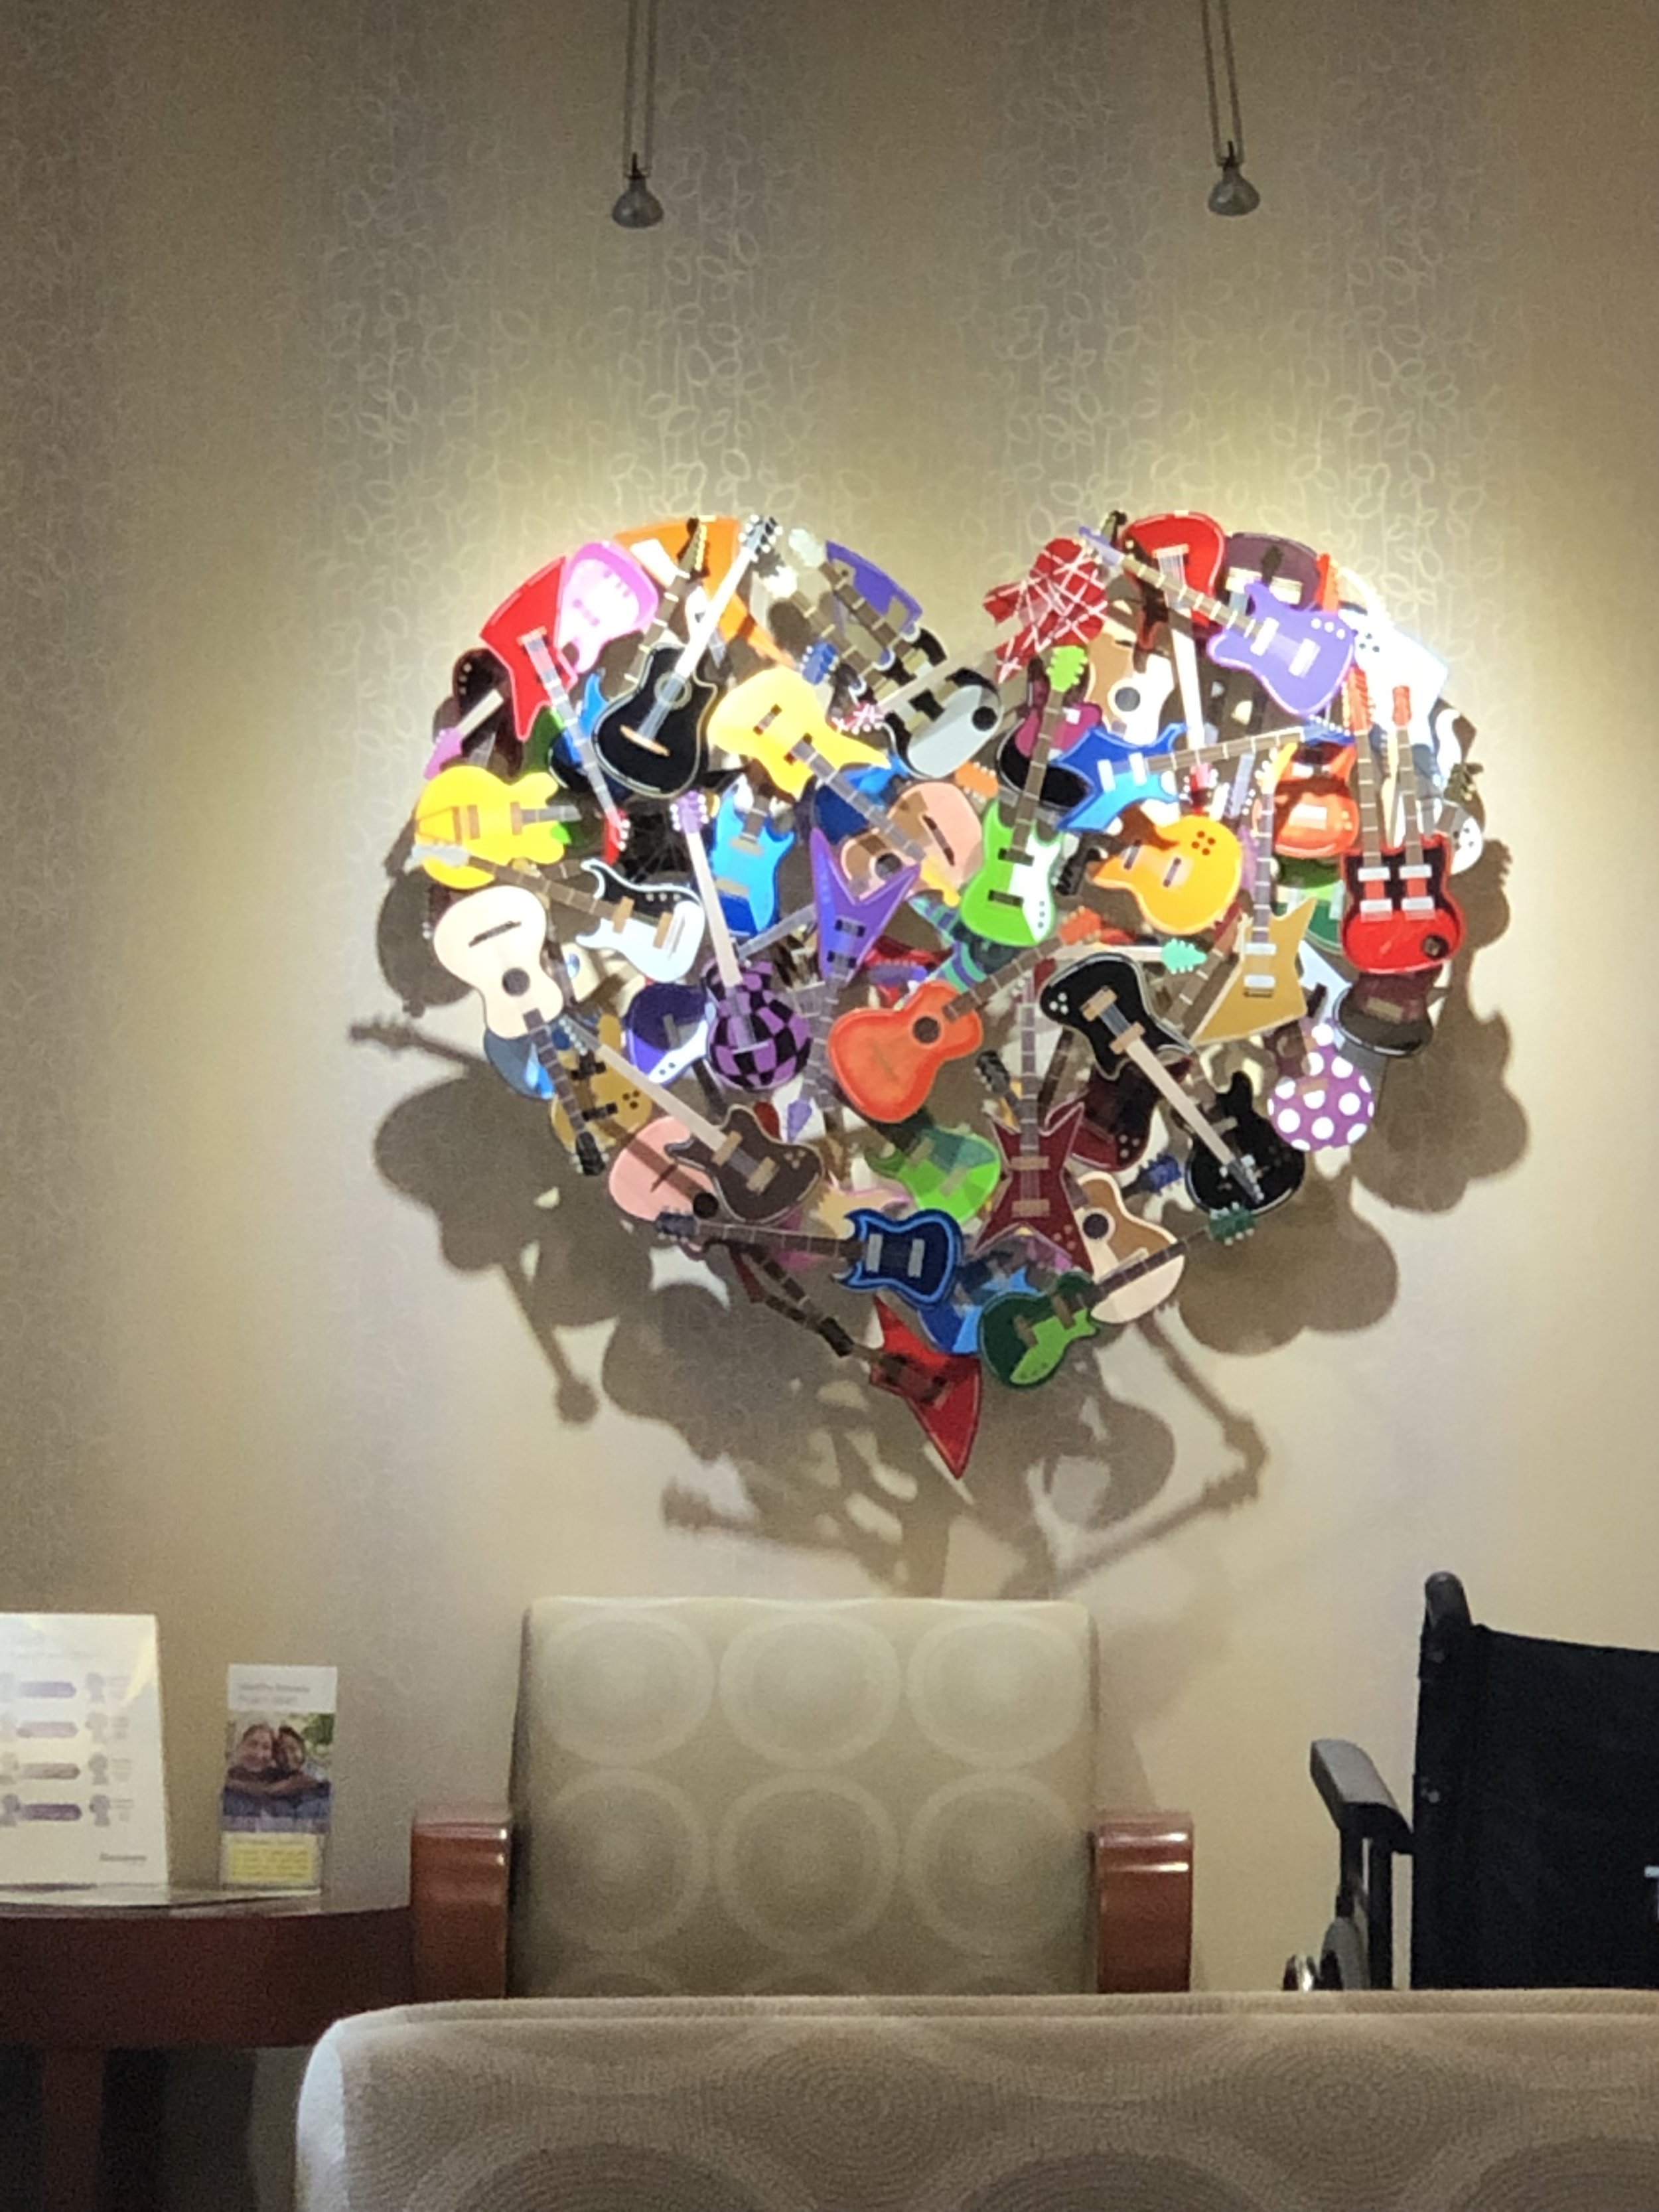 A sculpture in the cardiac wing of the hospital